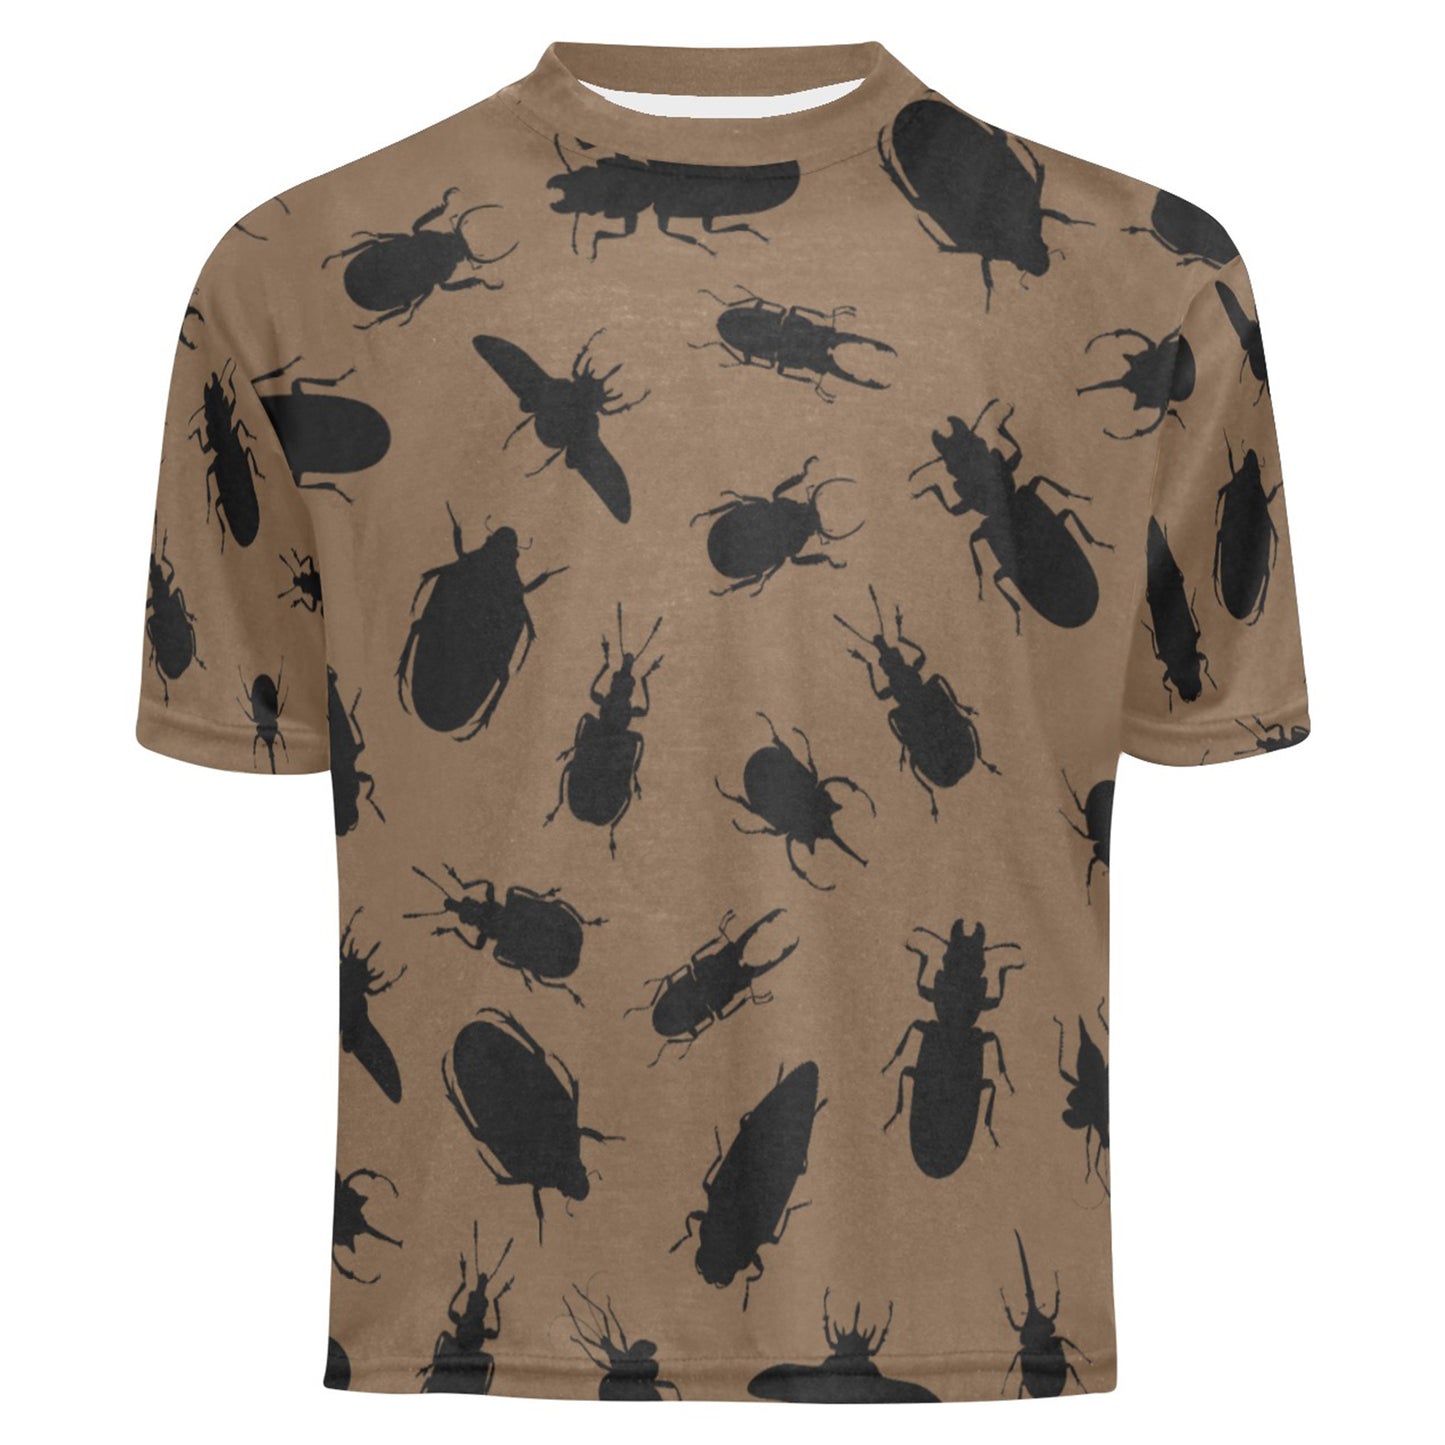 INSECTARIUM - Unisex All Over Print Kid's T-Shirt